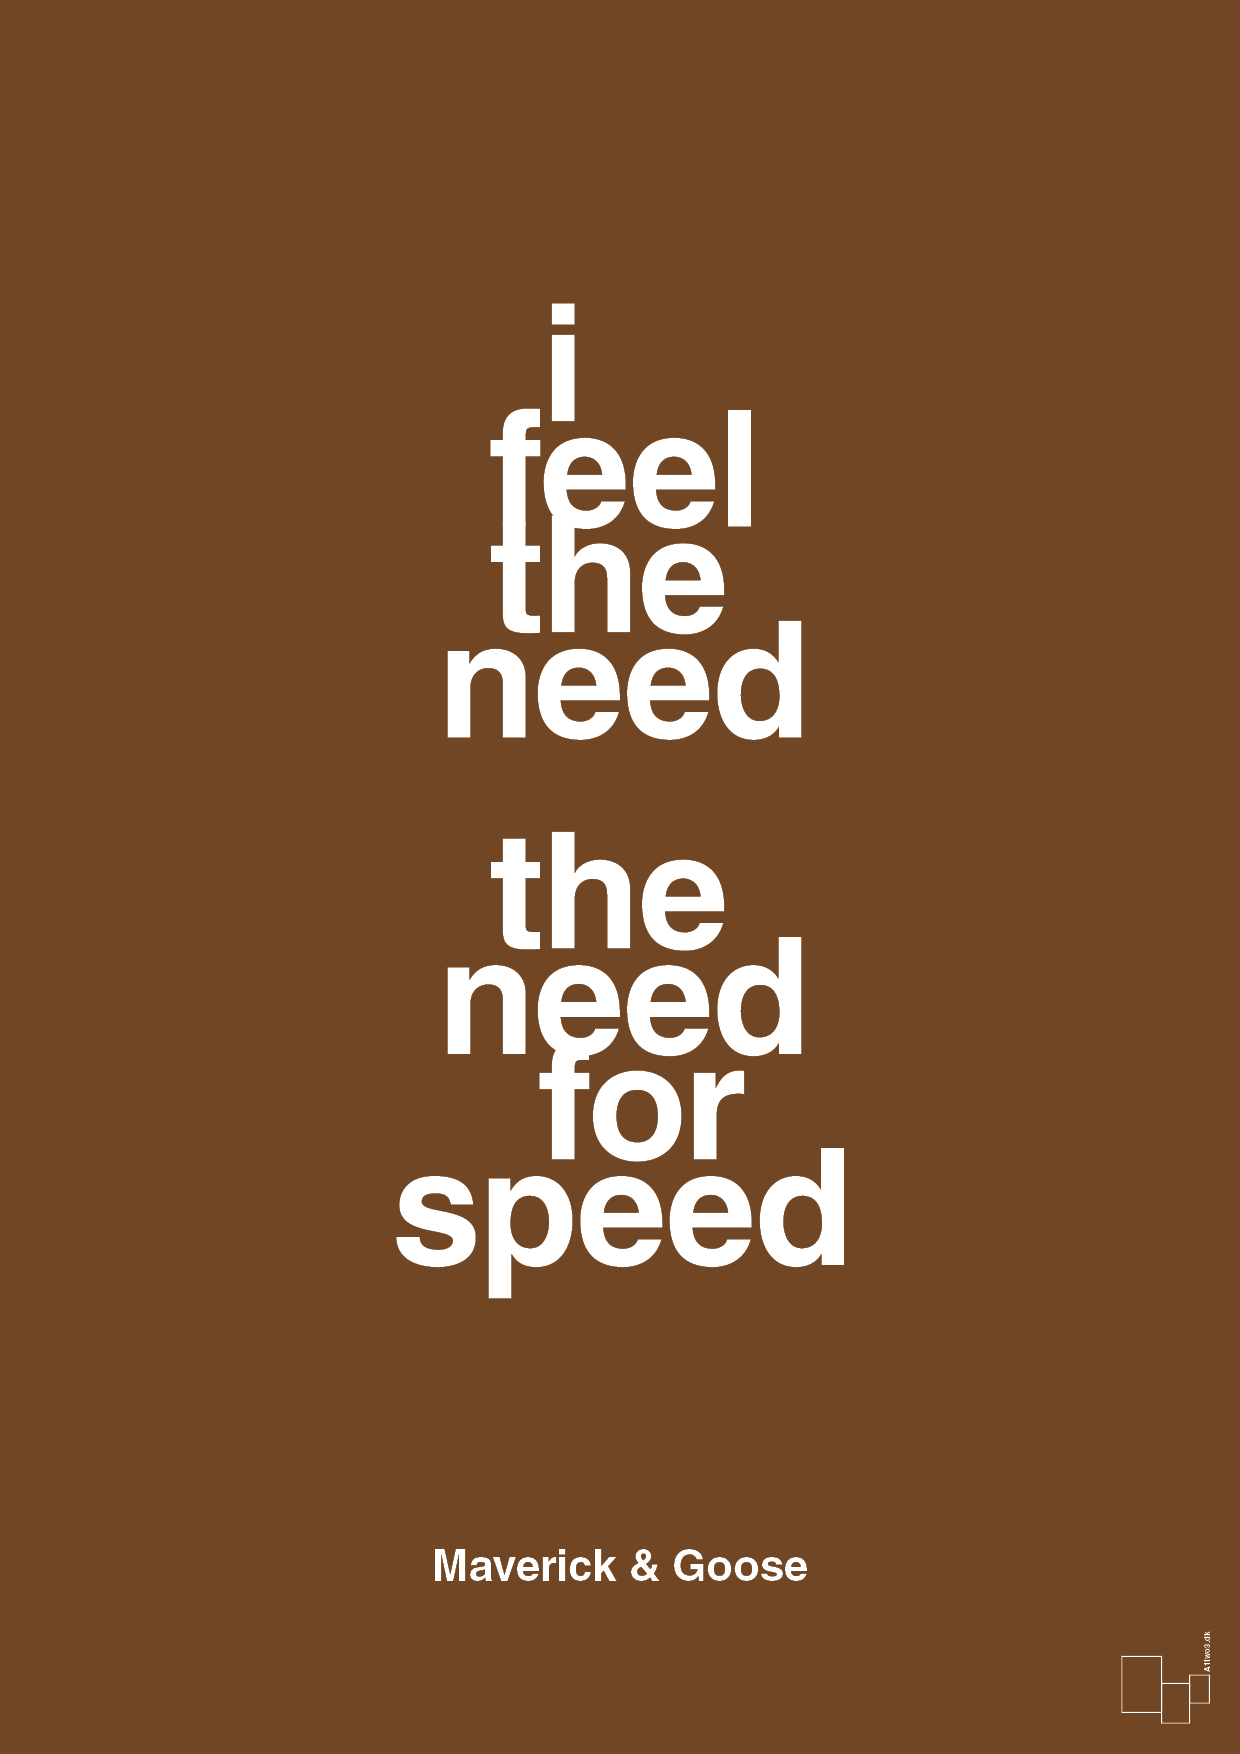 i feel the need the need for speed - Plakat med Citater i Dark Brown